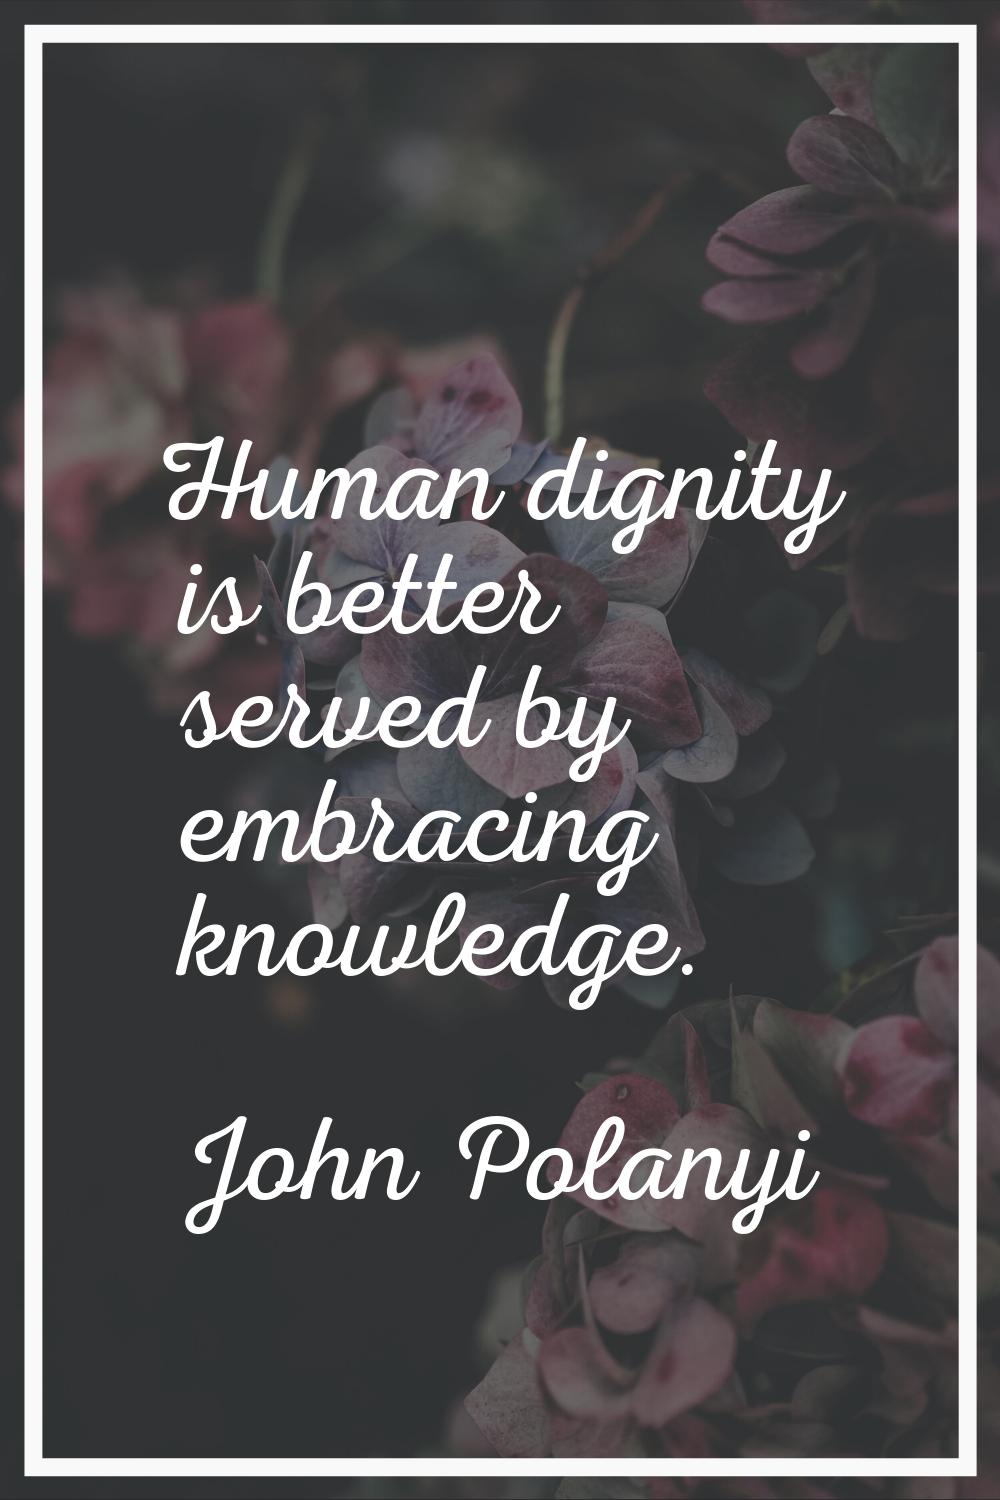 Human dignity is better served by embracing knowledge.